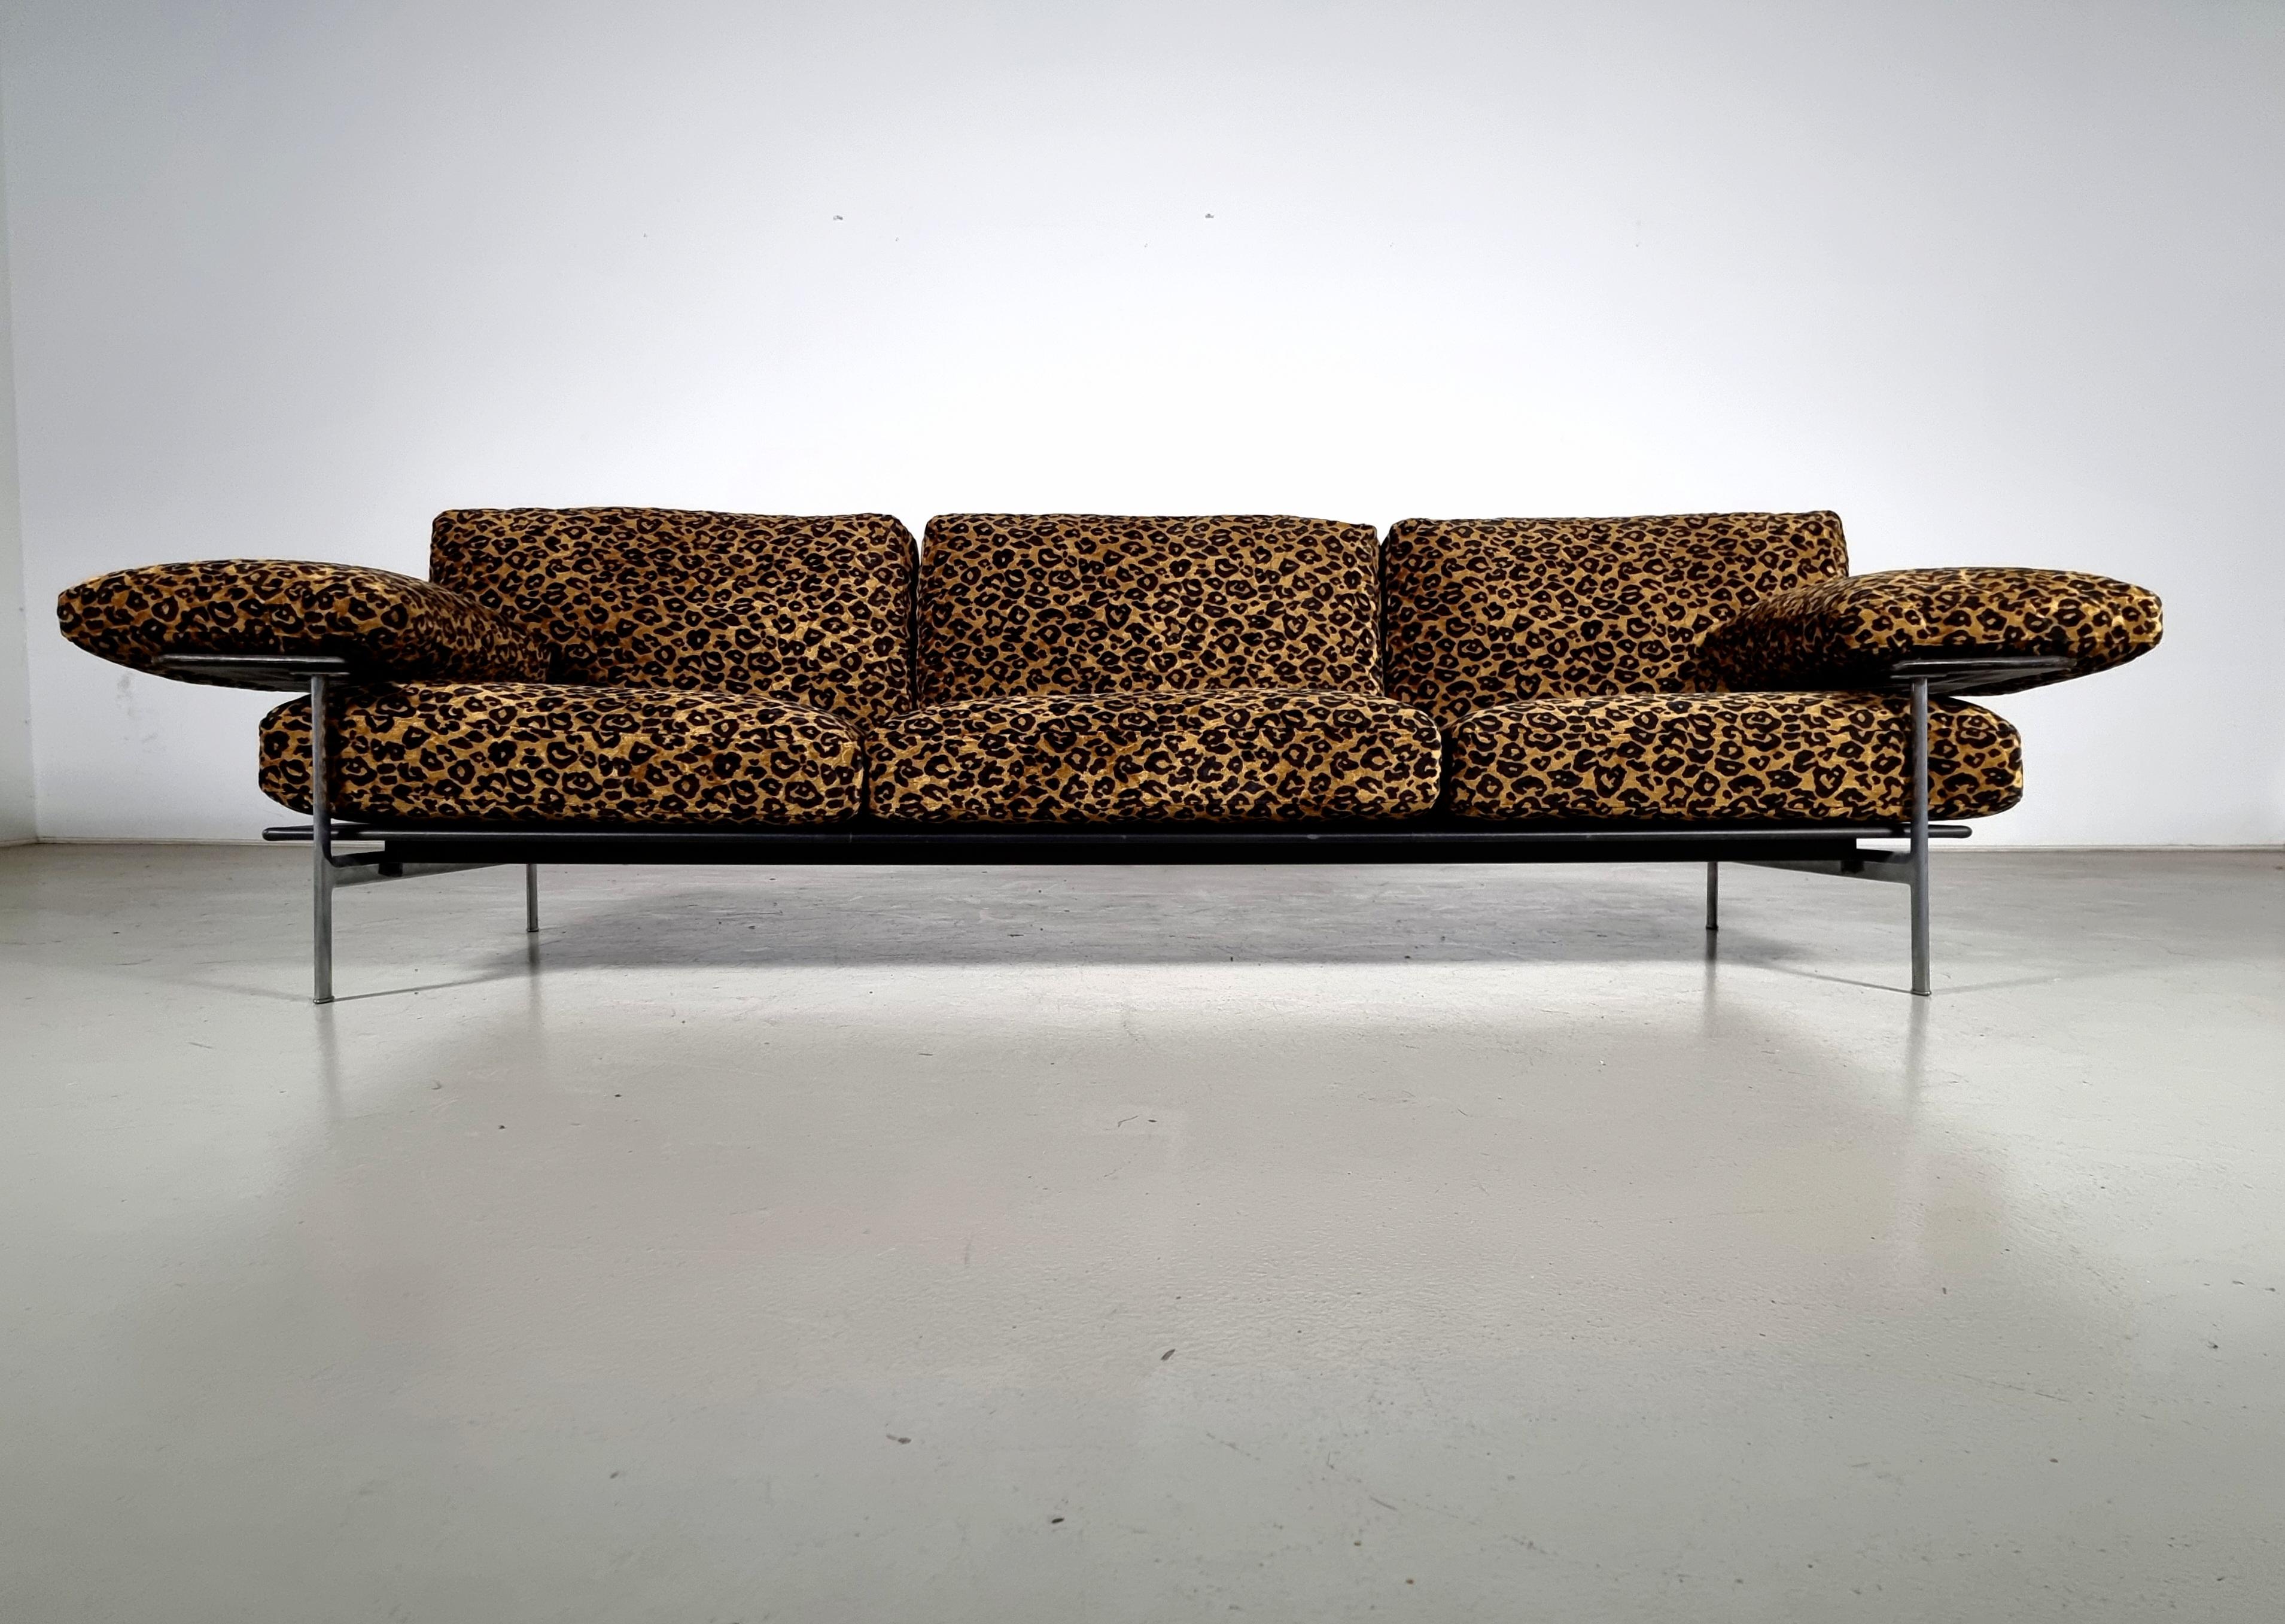 Diesis sofa, designed by Antonio Citterio and Paolo Nava for B&B Italia.

The epitome of innovative research and sophisticated handcrafting skills, it has become a landmark in the history of design.
This is the desirable and rare three-seat version